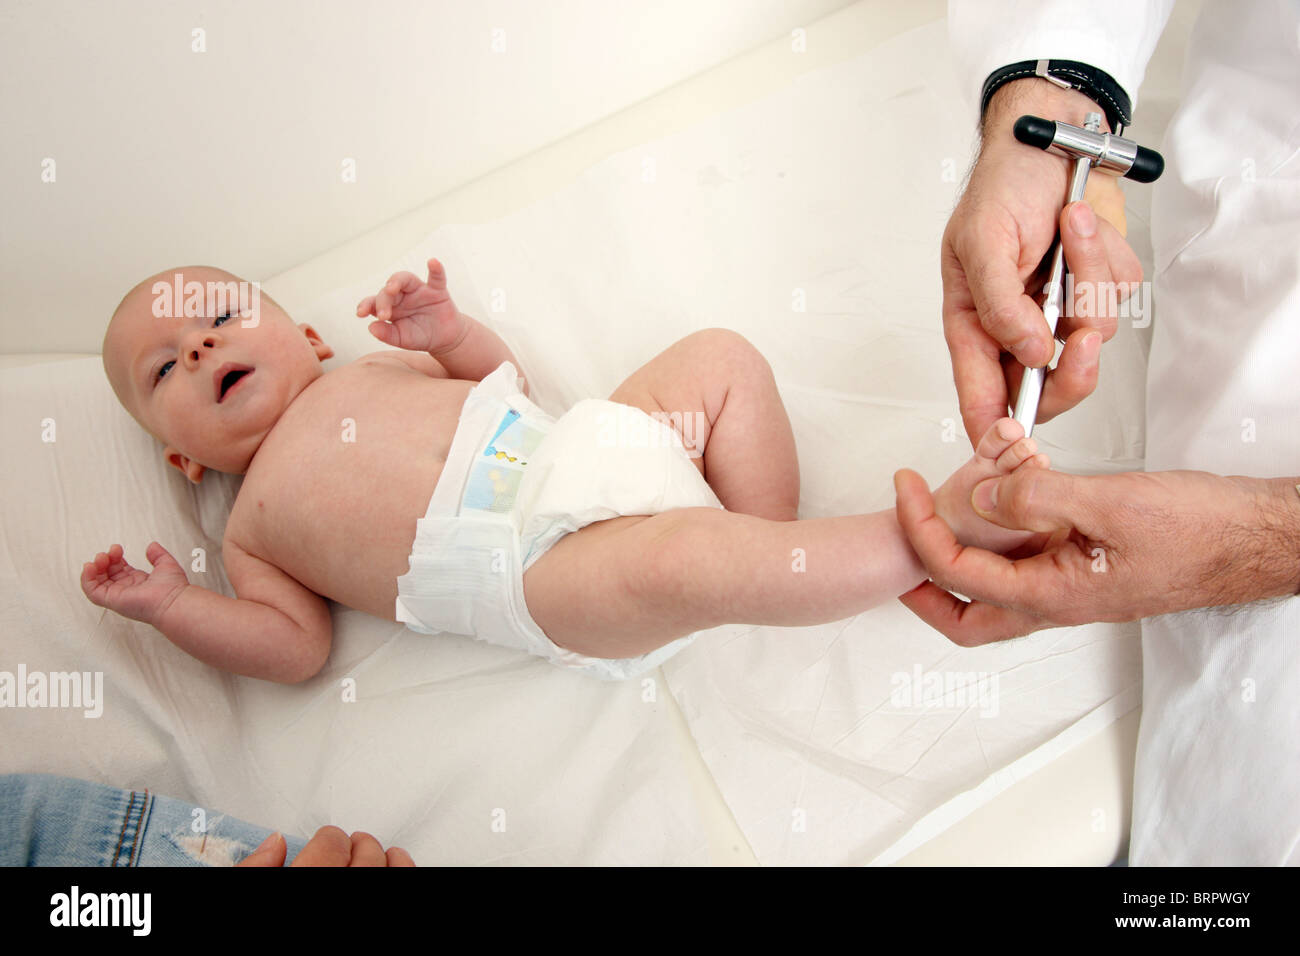 Doctor's surgery, paediatrician. Mother and baby. Medical examination of a 4 month old newborn. Food reflex test. Stock Photo